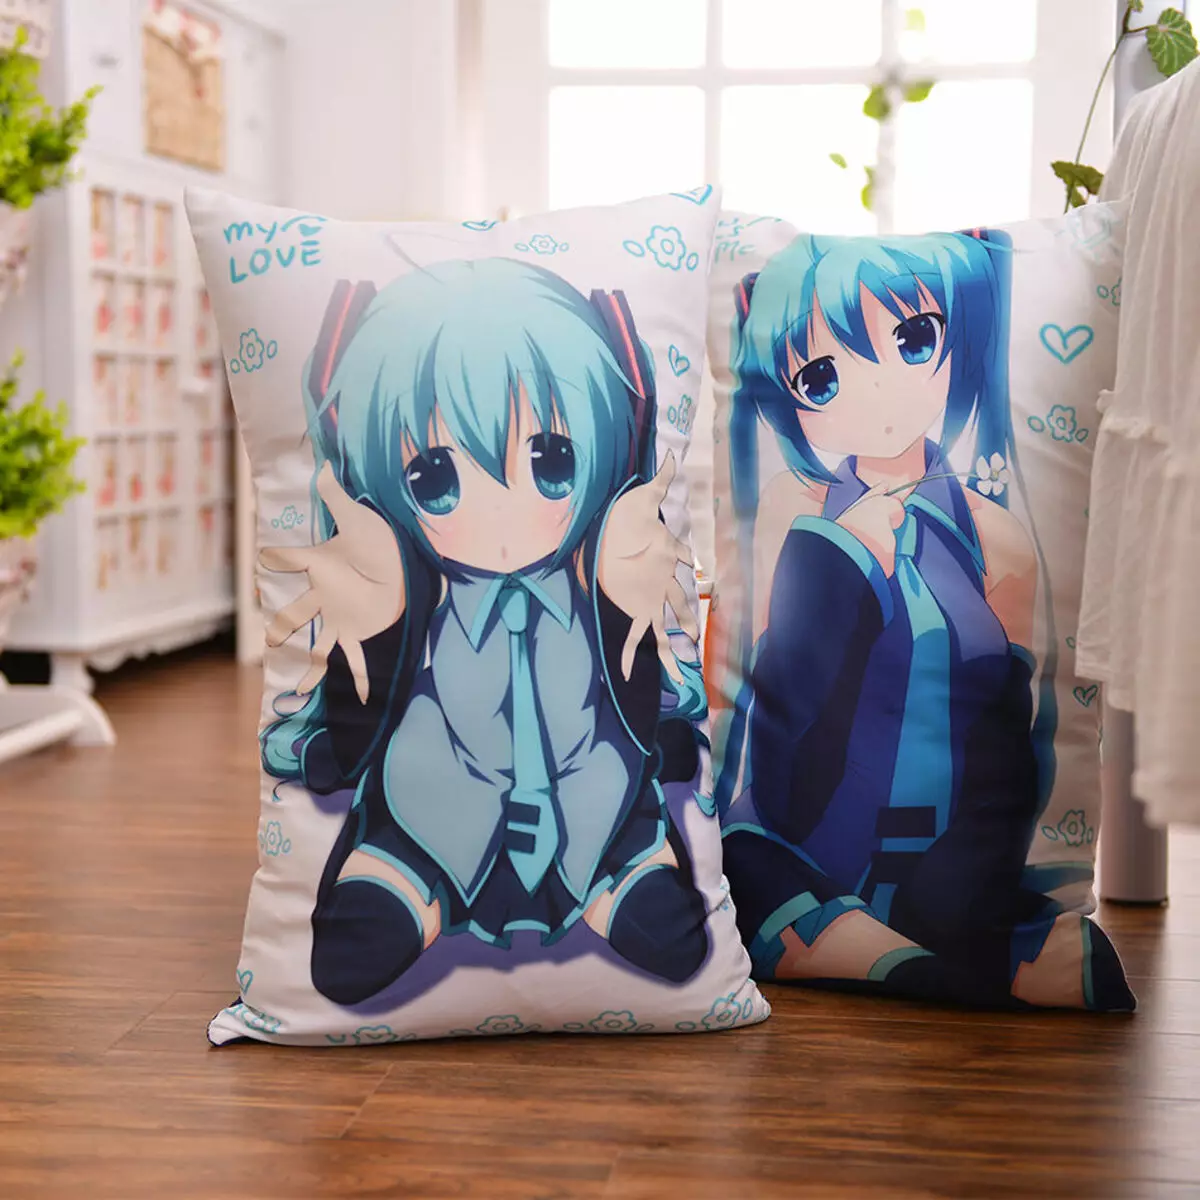 Anime-pillows: Dakimakur hug in full length, long big pillows with a print of girls and other characters 20757_8